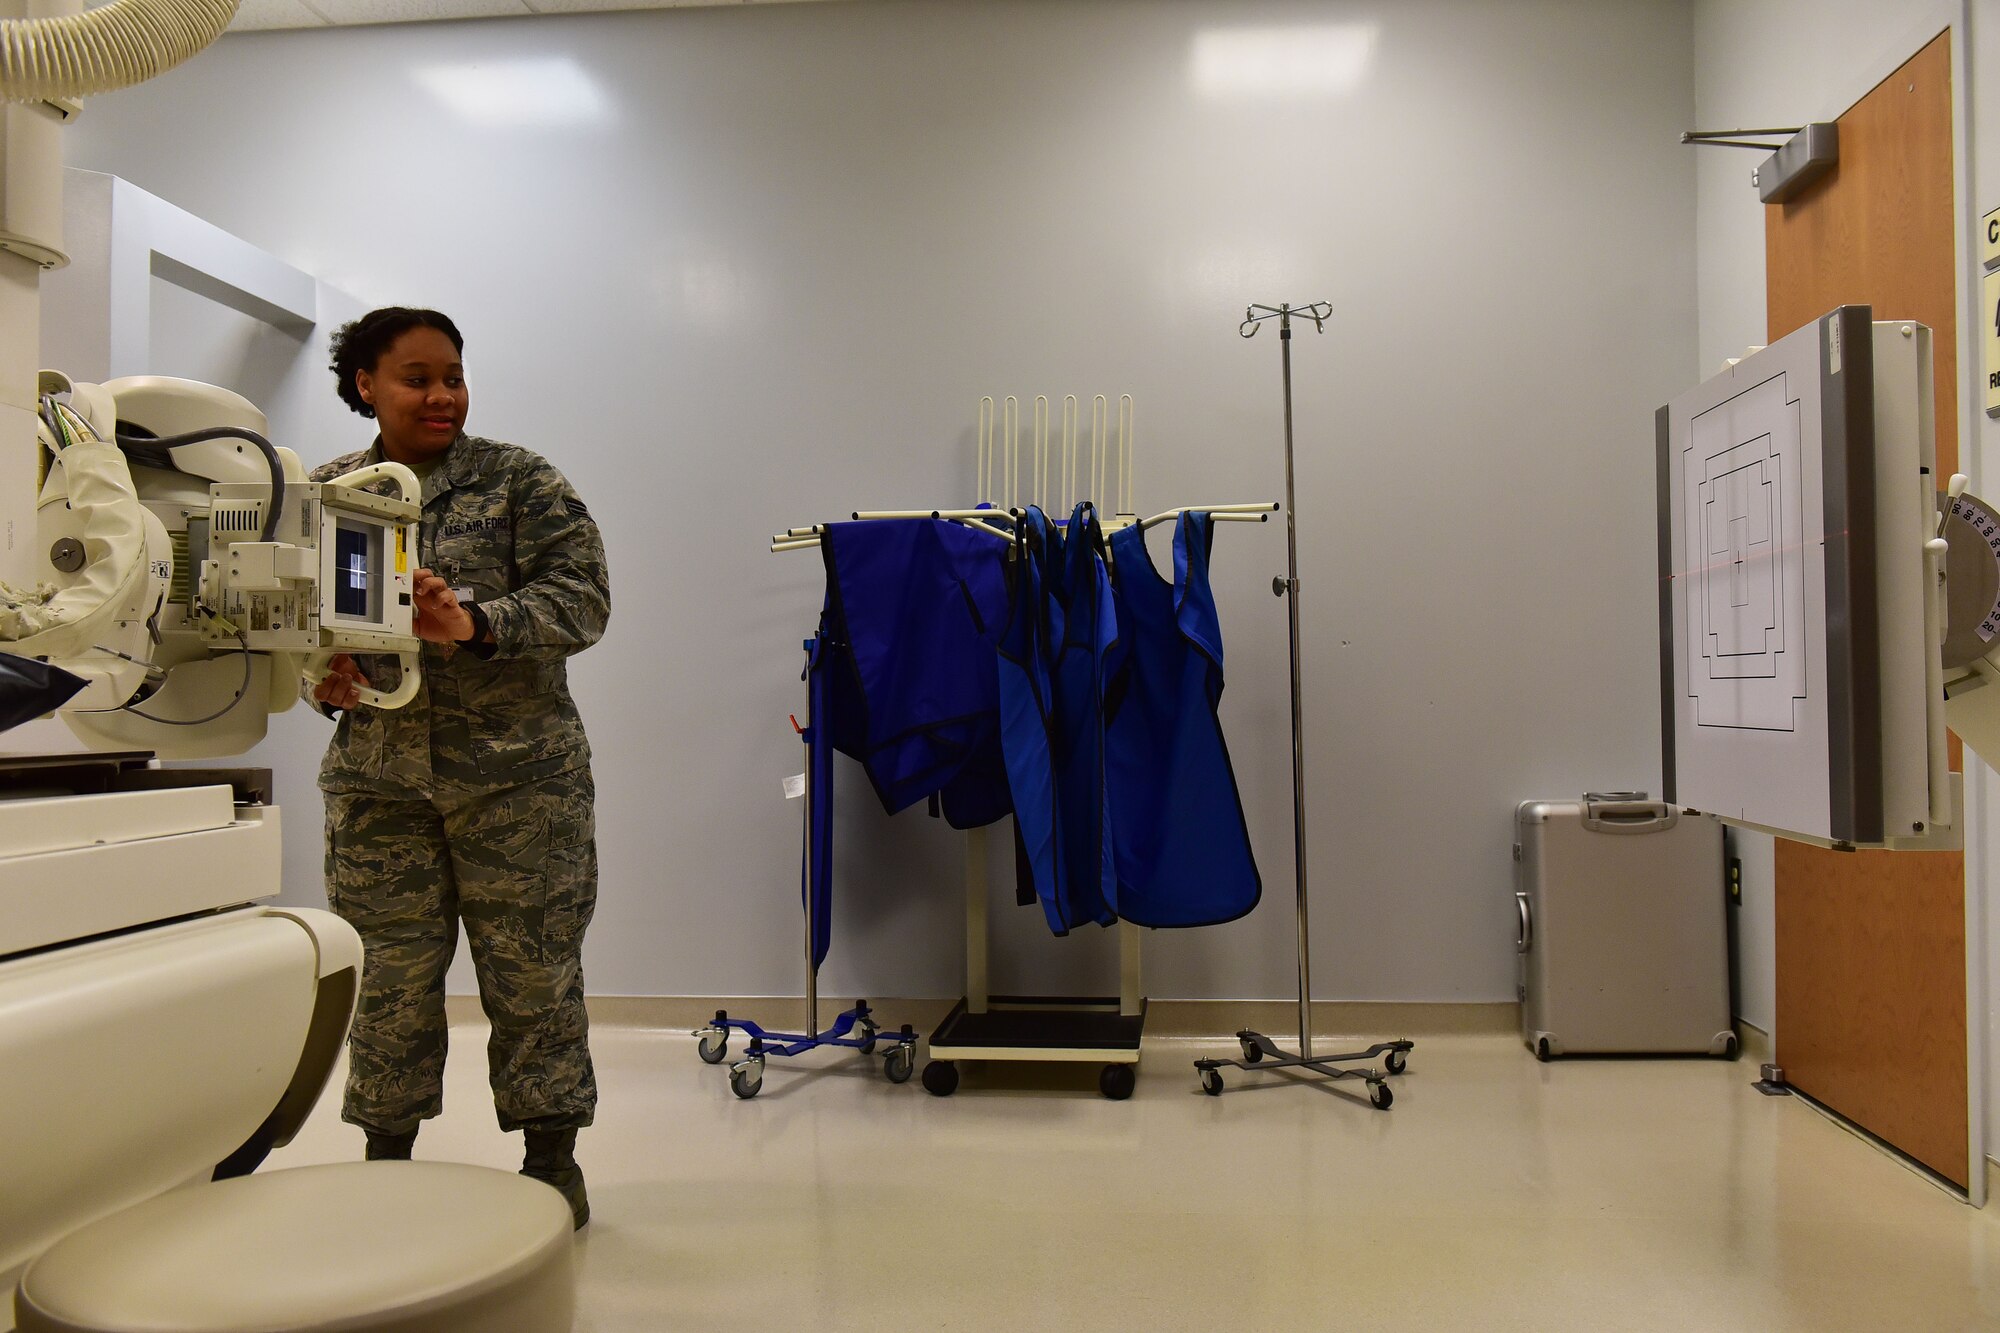 Senior Airman Akilah Hall, 19th Medical Support Squadron diagnostic imaging technologist, aims an X-ray tube at a target Dec. 5, 2017, at Little Rock Air Force Base, Ark. The target allows for a standard and reference point for Hall, when she is taking x-rays. (U.S. Air Force photo by Airman 1st Class Rhett Isbell)